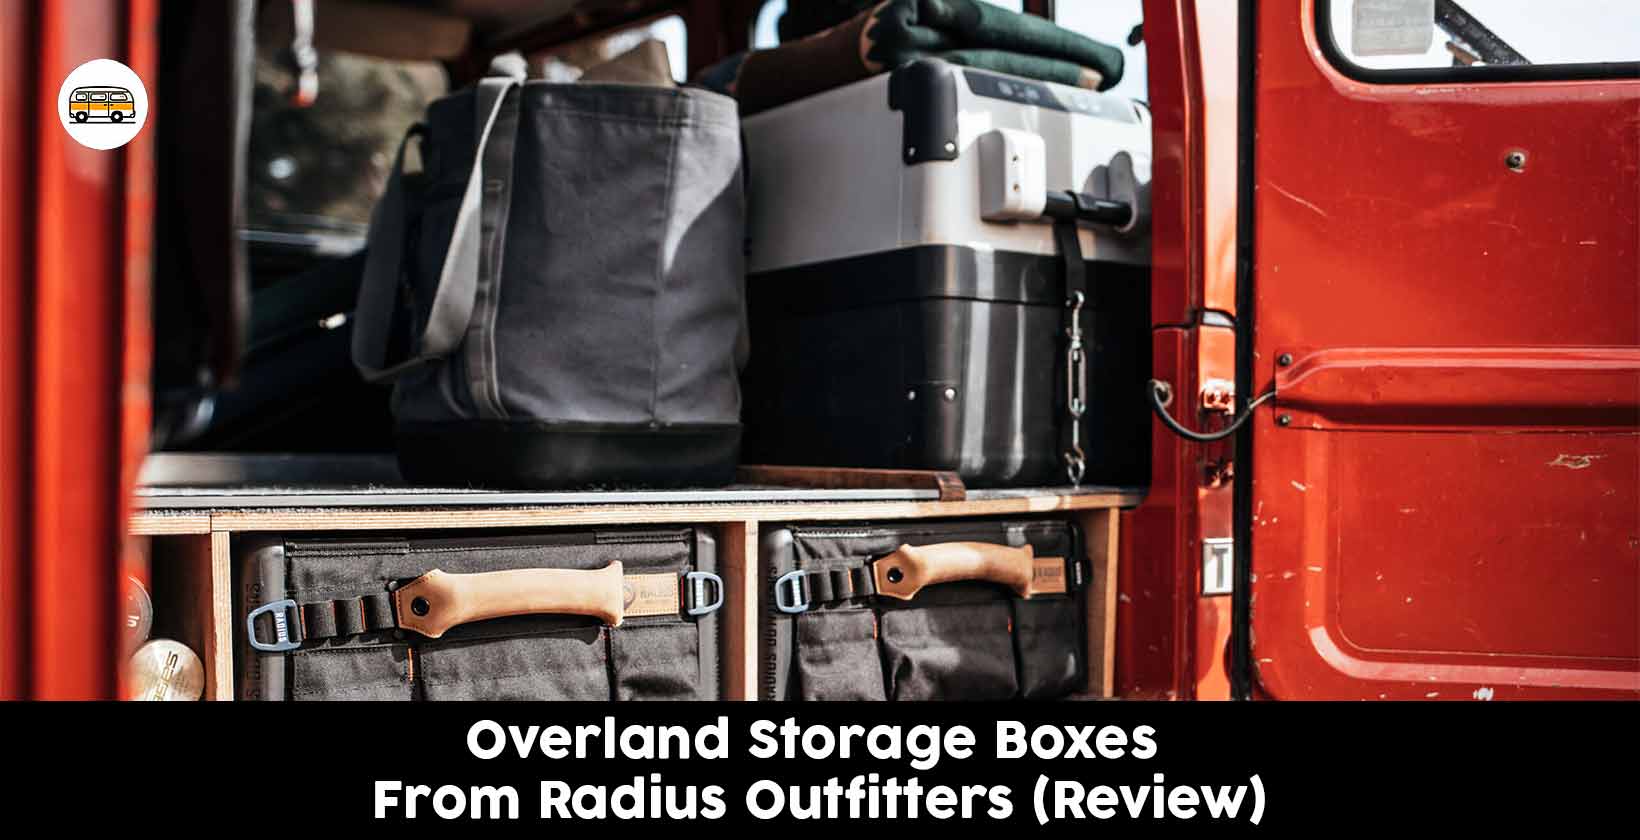 Overland Storage Boxes From Radius Outfitters